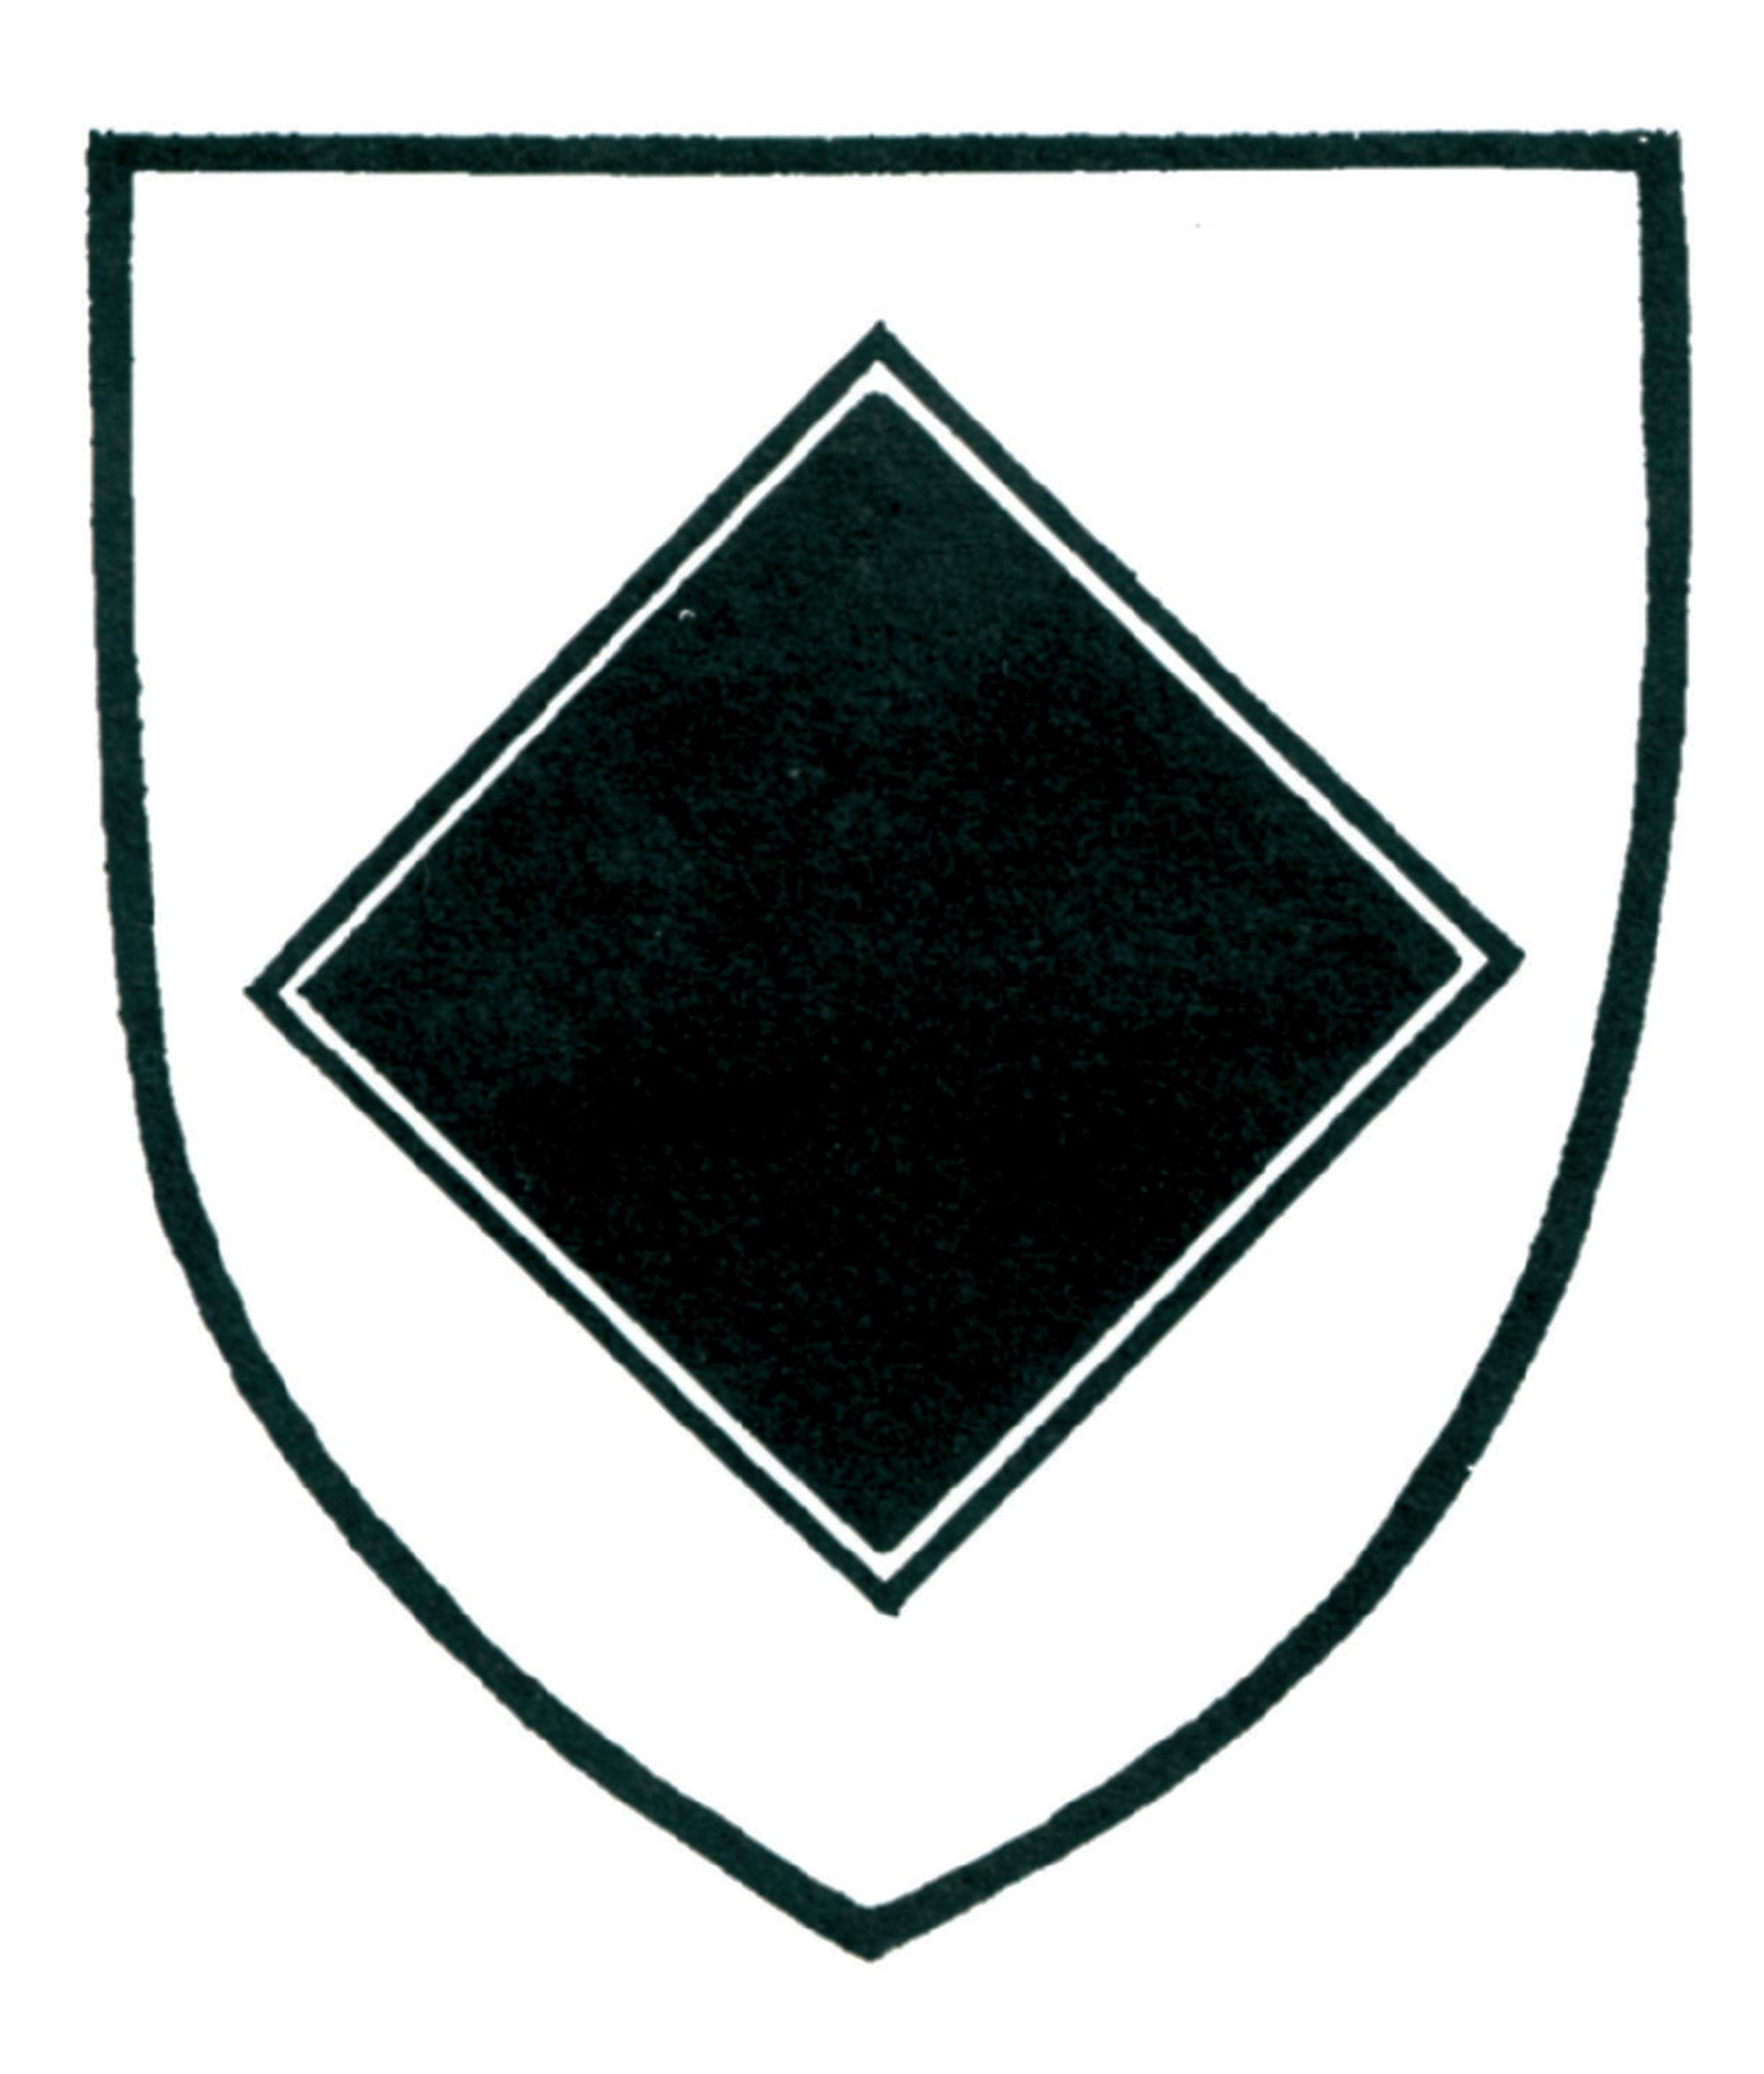 A lozenge form from heraldry.